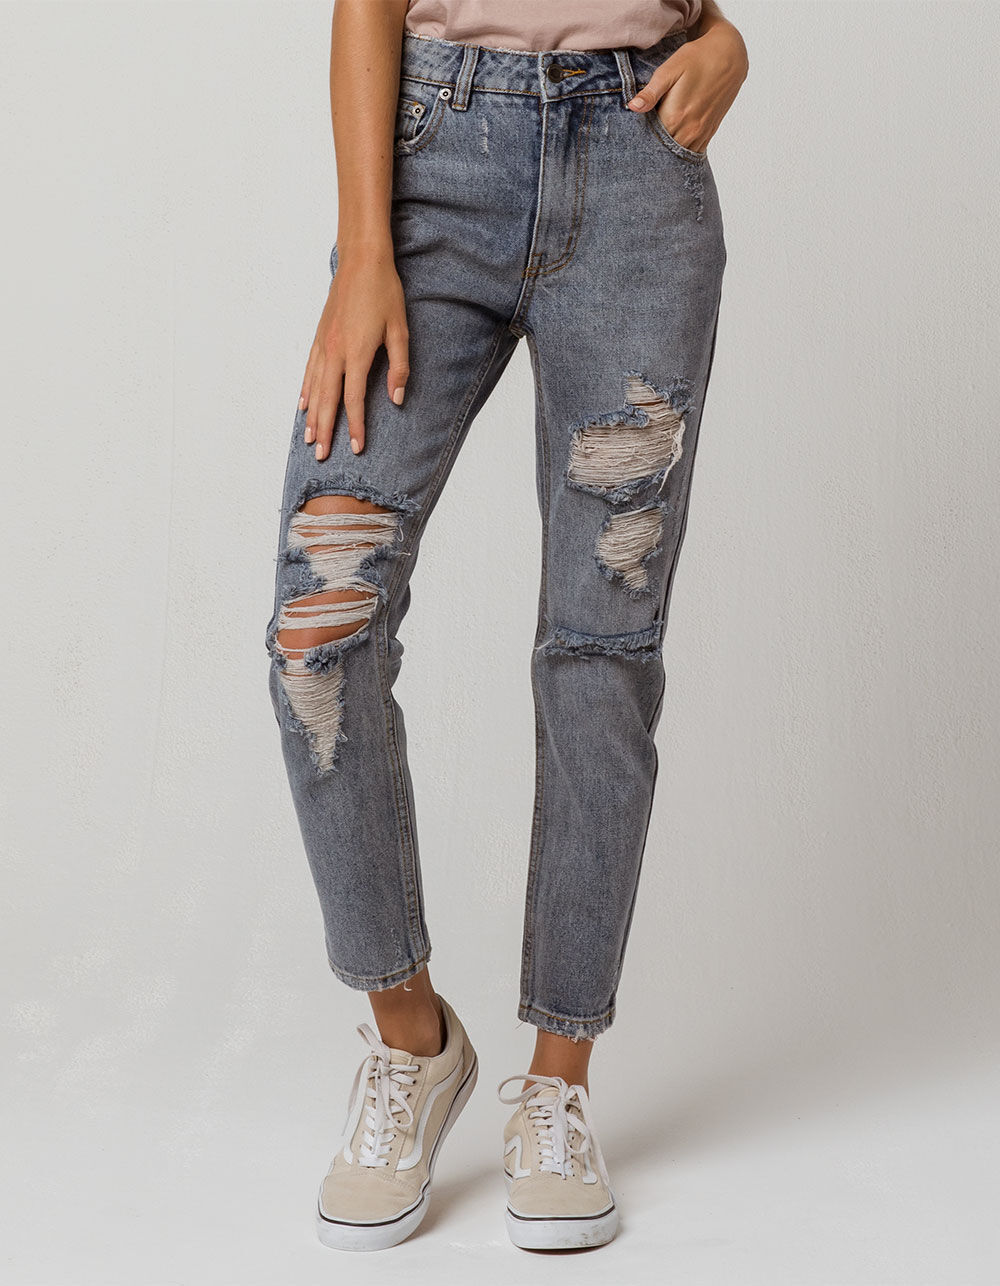 RVCA Piper Womens Ripped Jeans - VINTAGE | Tillys